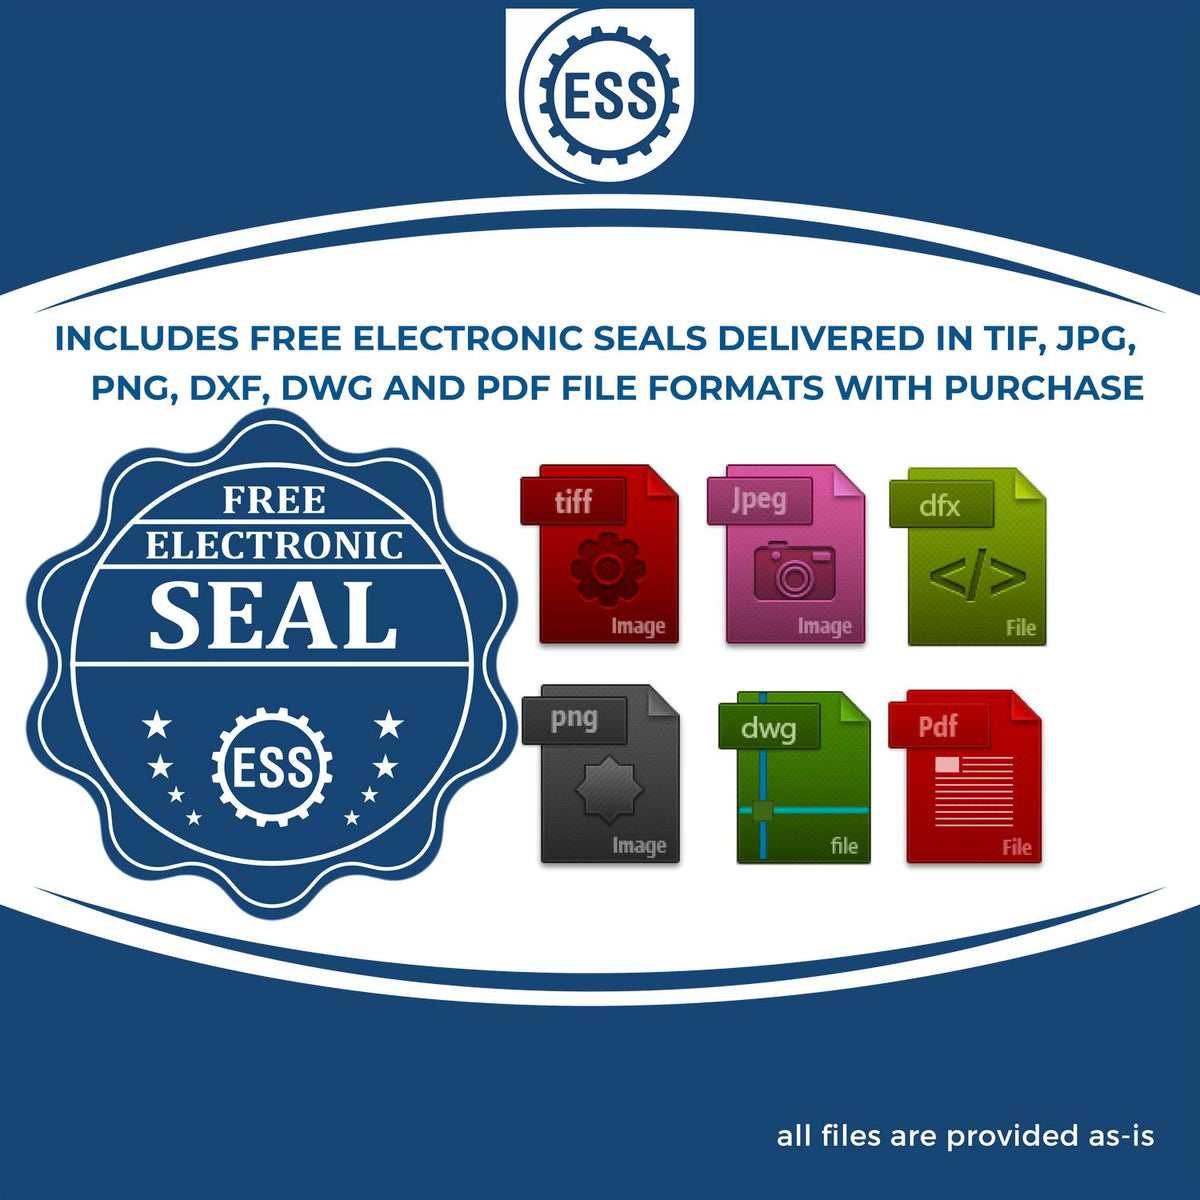 An infographic for the free electronic seal for the State of New Mexico Extended Long Reach Engineer Seal illustrating the different file type icons such as DXF, DWG, TIF, JPG and PNG.